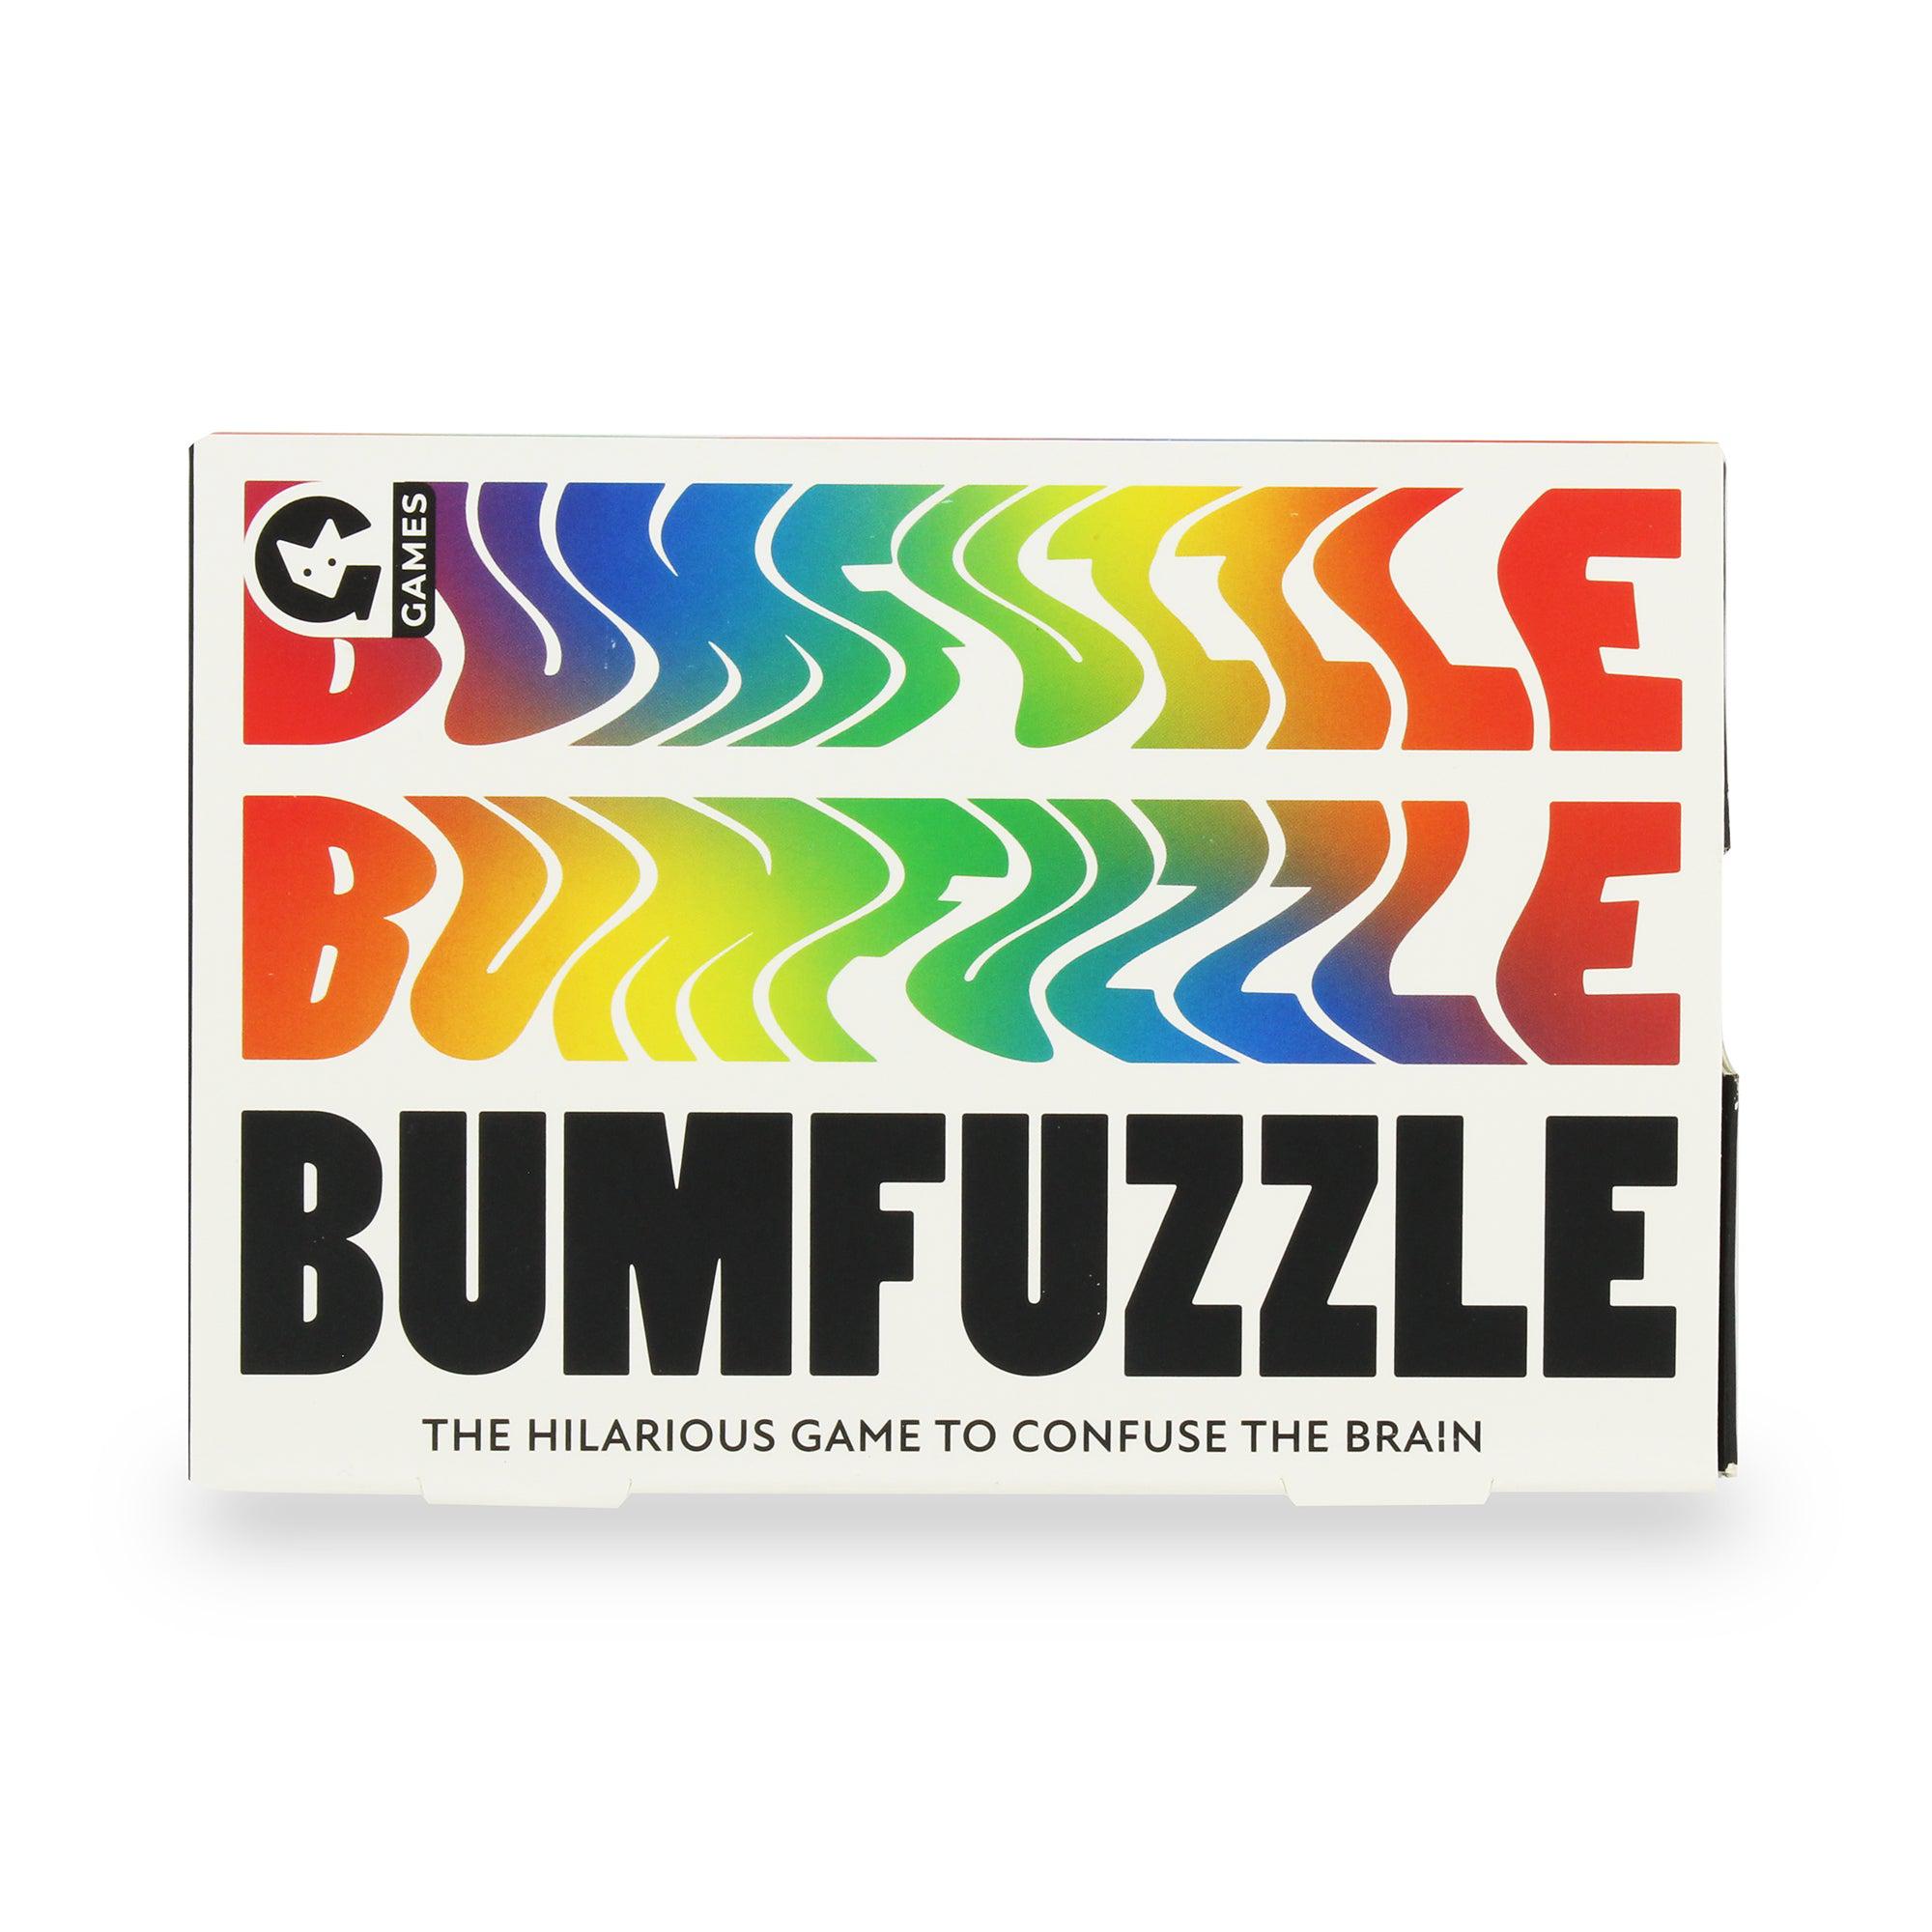 Bumfuzzle-Games-Ginger Fox-Yellow Springs Toy Company